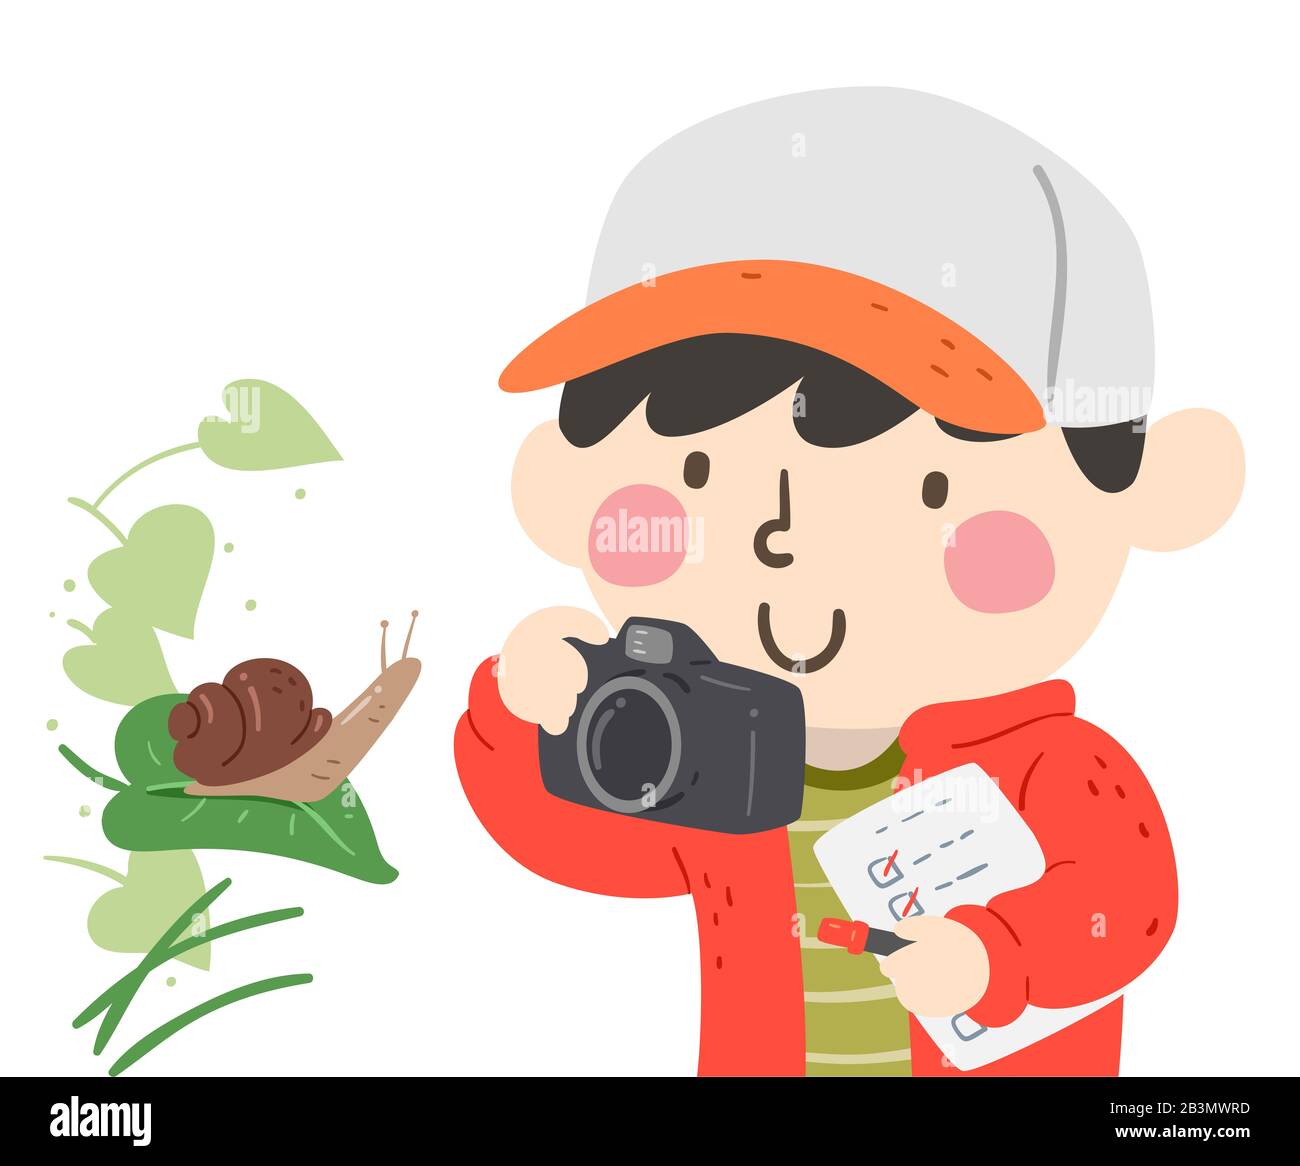 Illustration of a Kid Boy on a Spring Photo Hunt Taking Picture of a Snail and Holding a Checklist Stock Photo